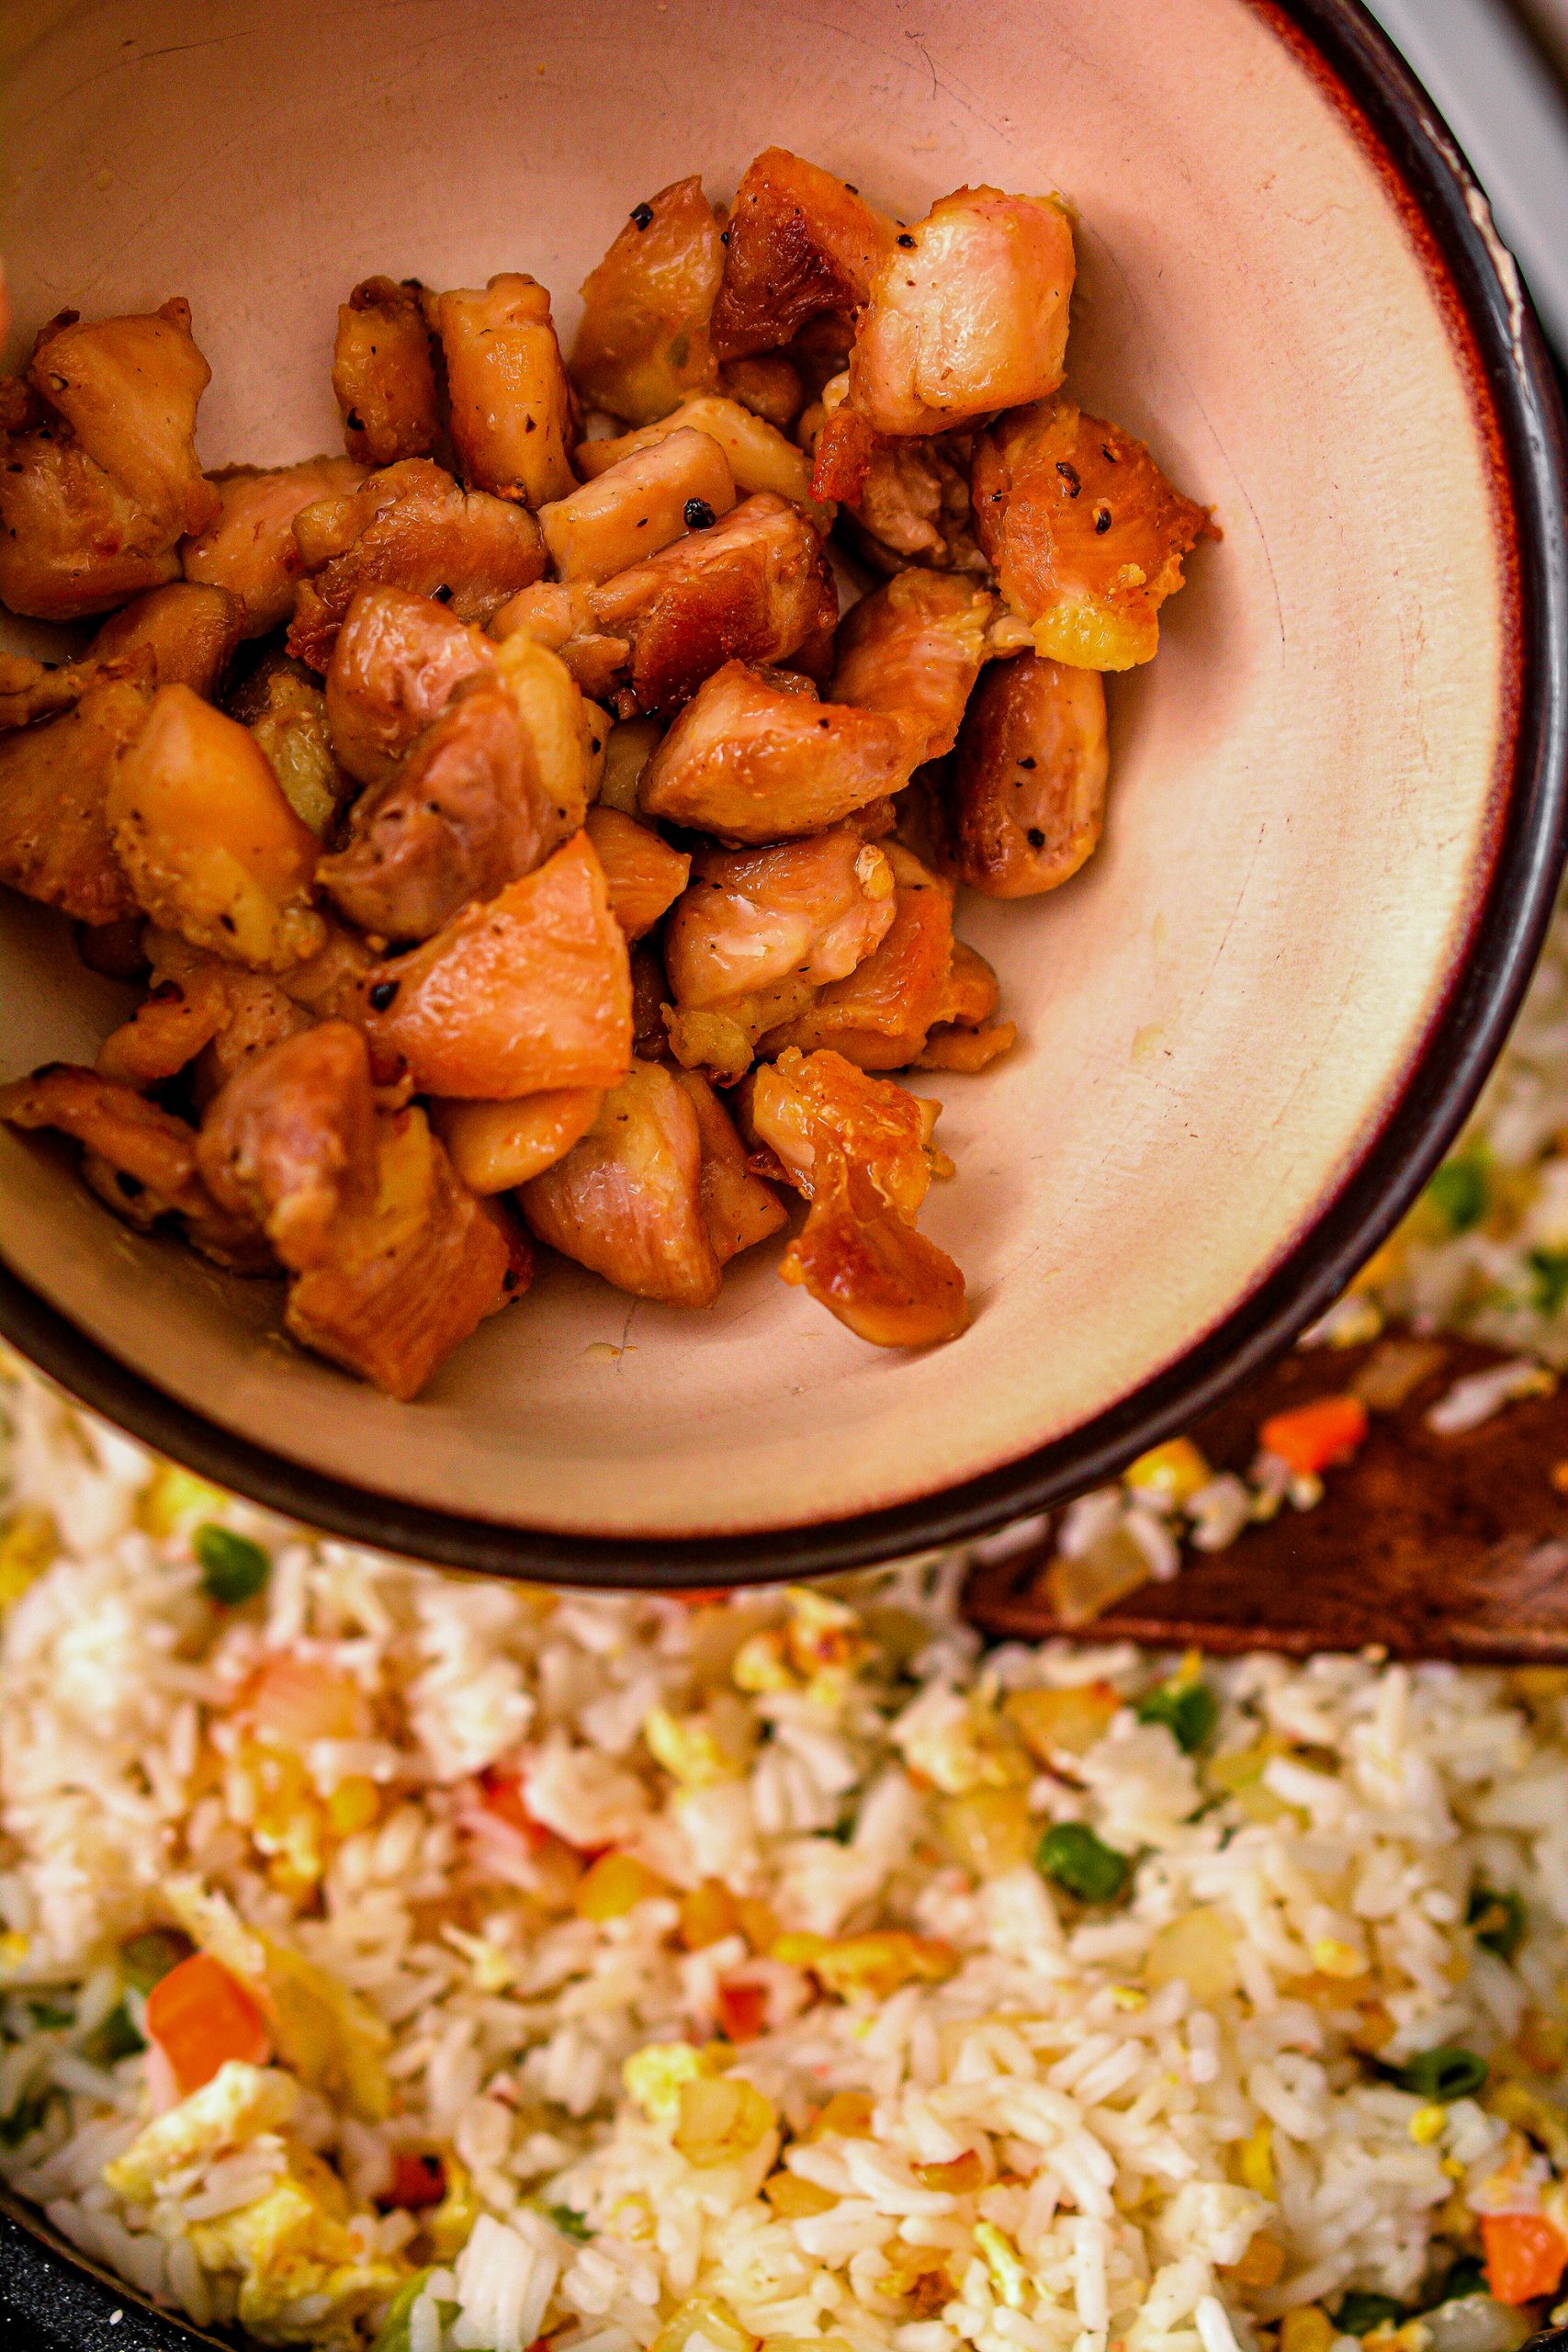 Add the rice and chicken to the skillet and stir to combine.